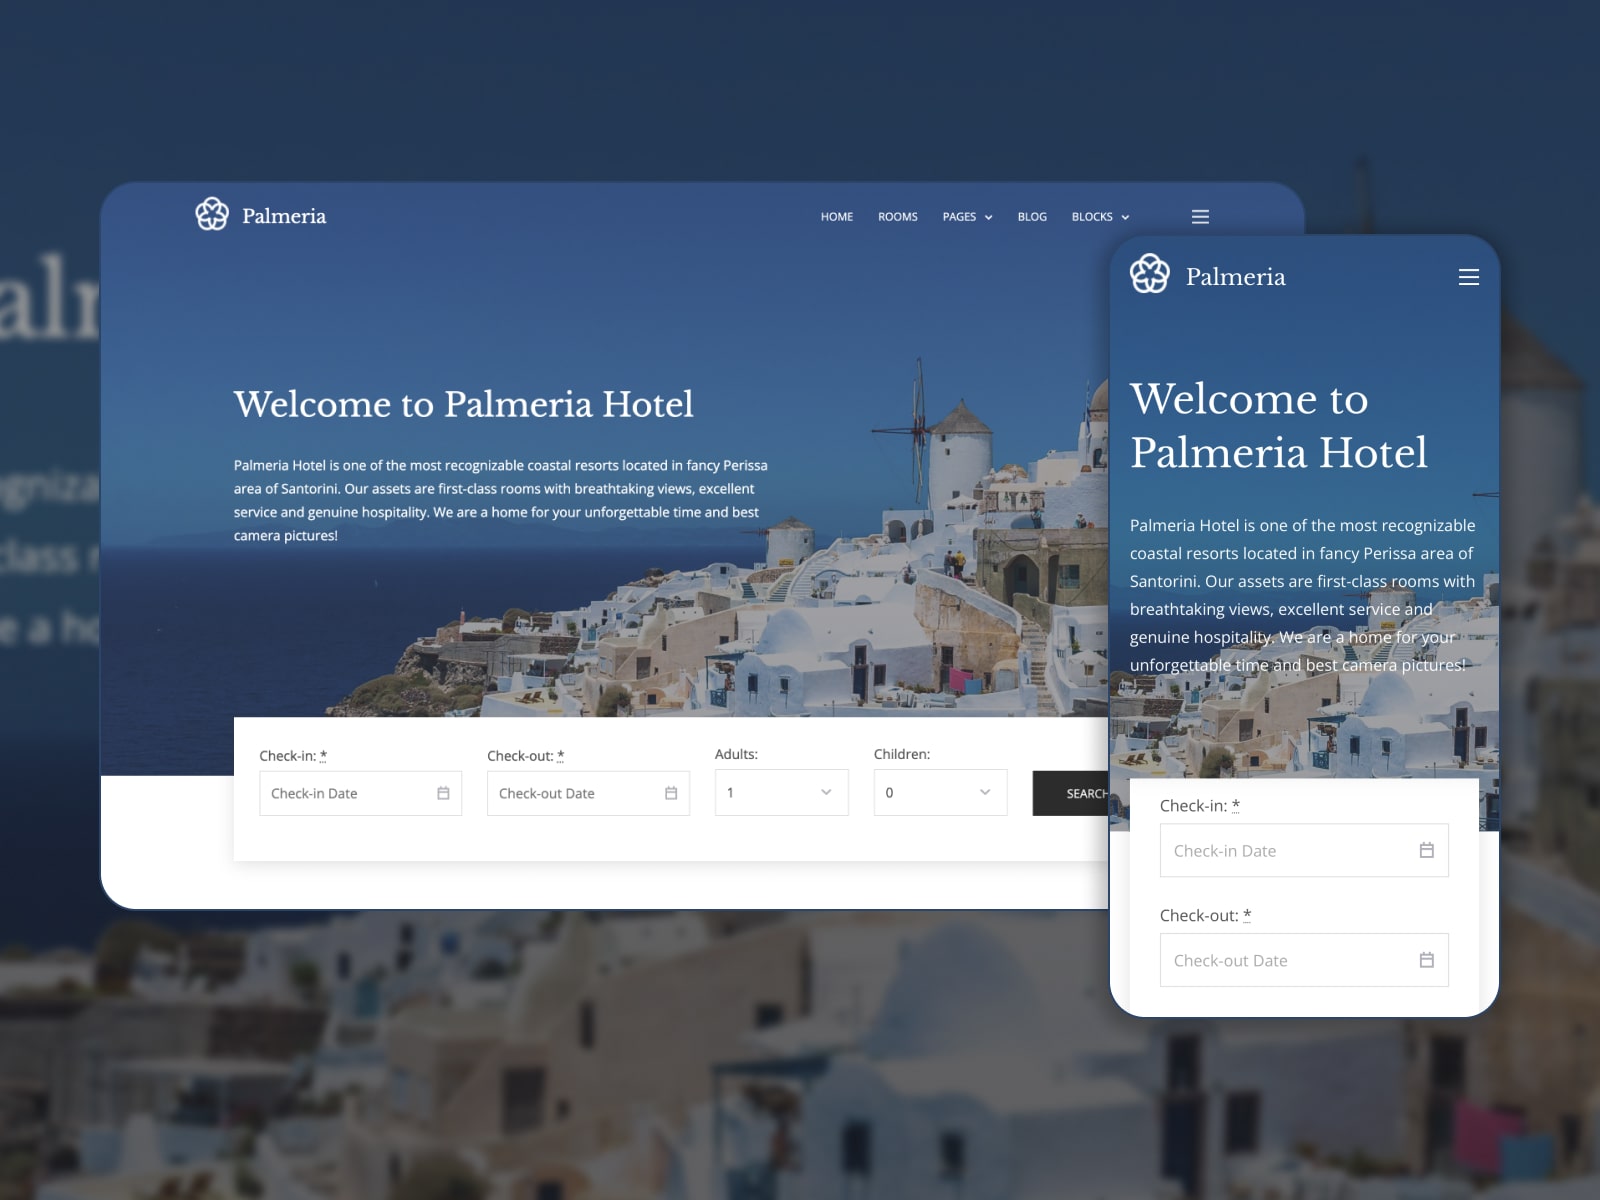 Collage of the Palmeria Gutenberg free WordPress theme for hotel business websites in blue and white colors.